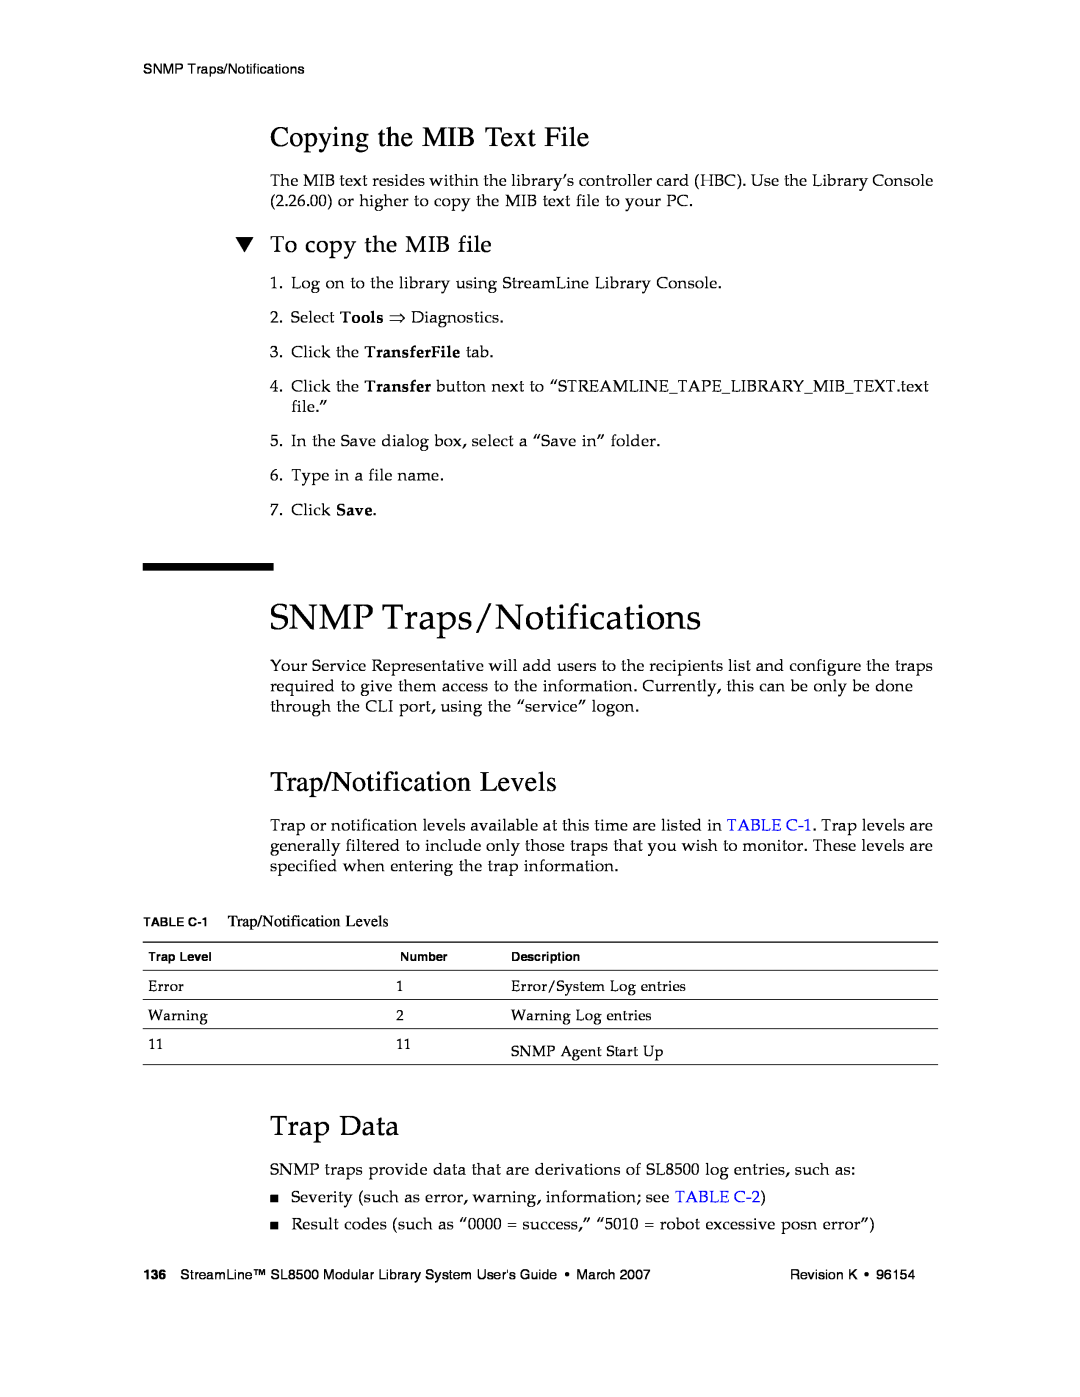 Sun Microsystems SL8500 manual SNMP Traps/Notifications, Copying the MIB Text File, Trap/Notification Levels, Trap Data 